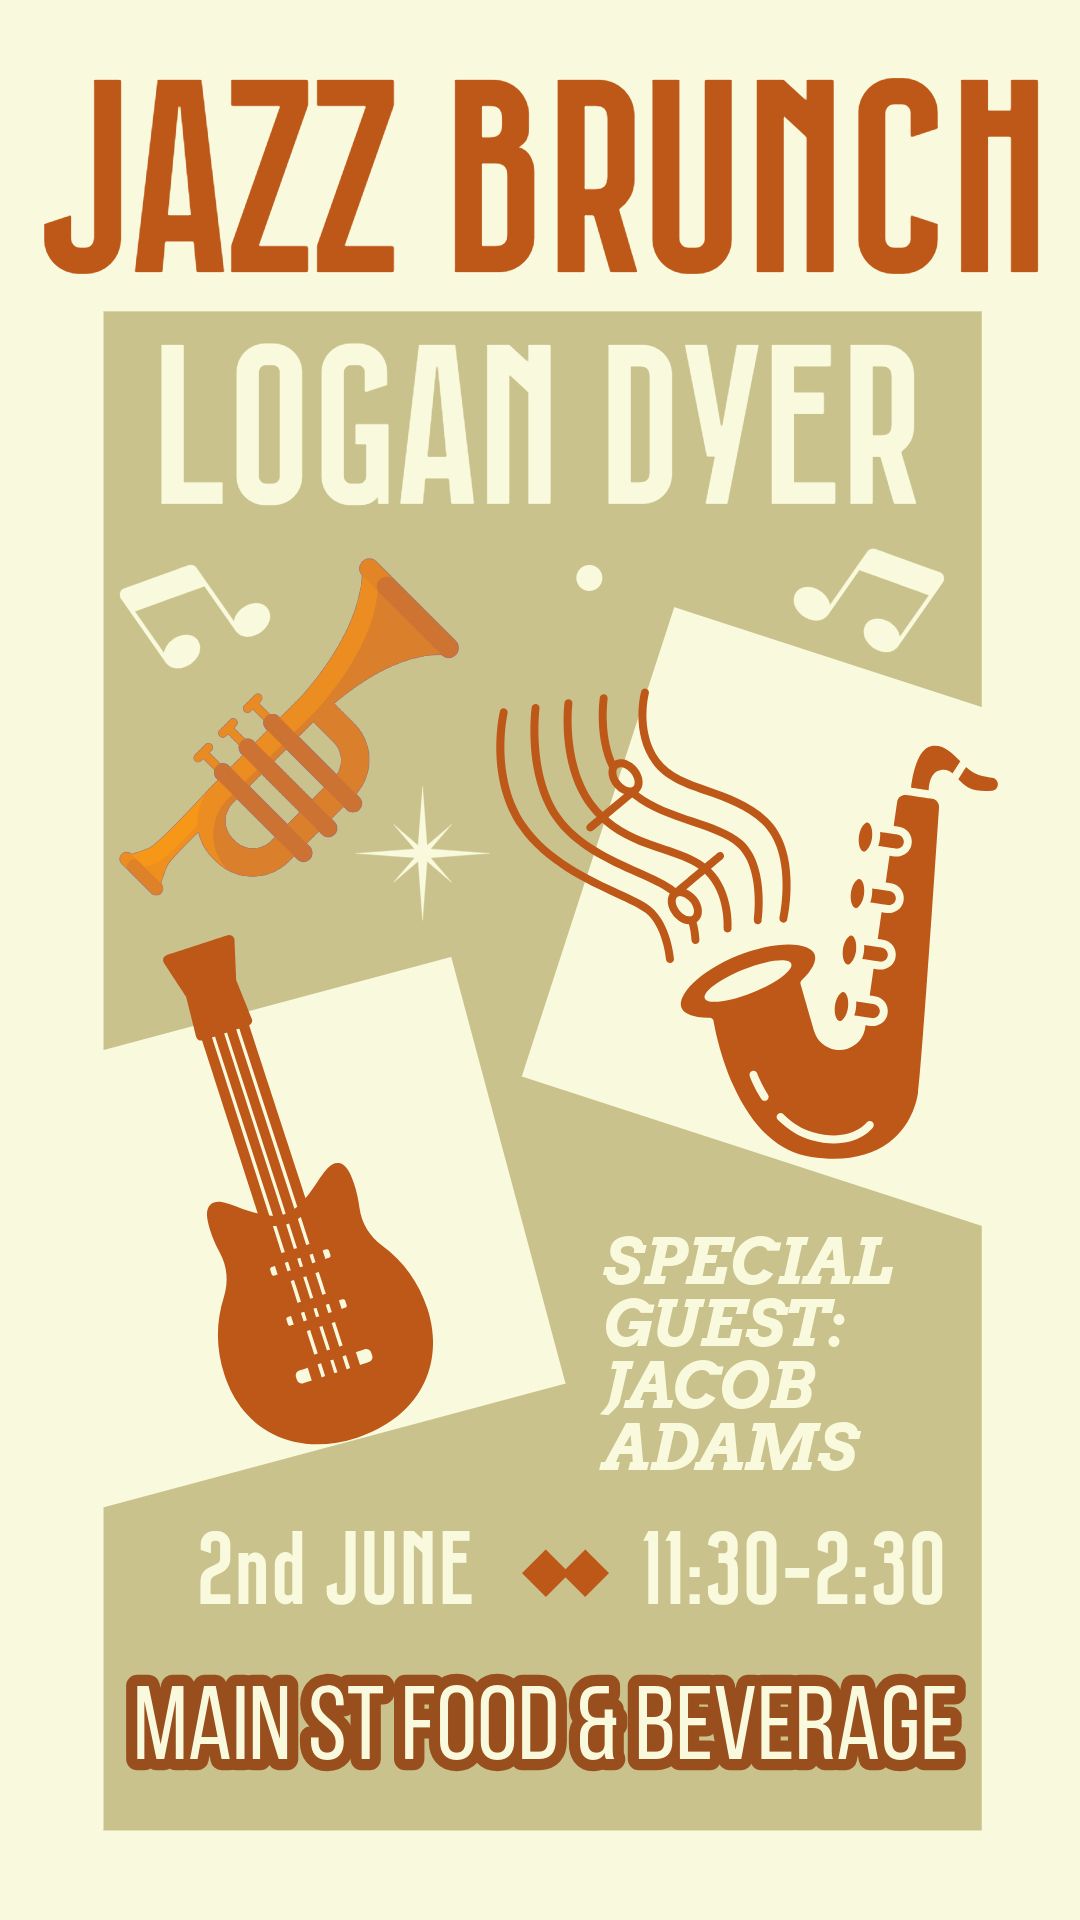 Jazz Brunch 6\/2 at Main St Food & Beverage with Logan Dyer and special guest Jacob Adams  